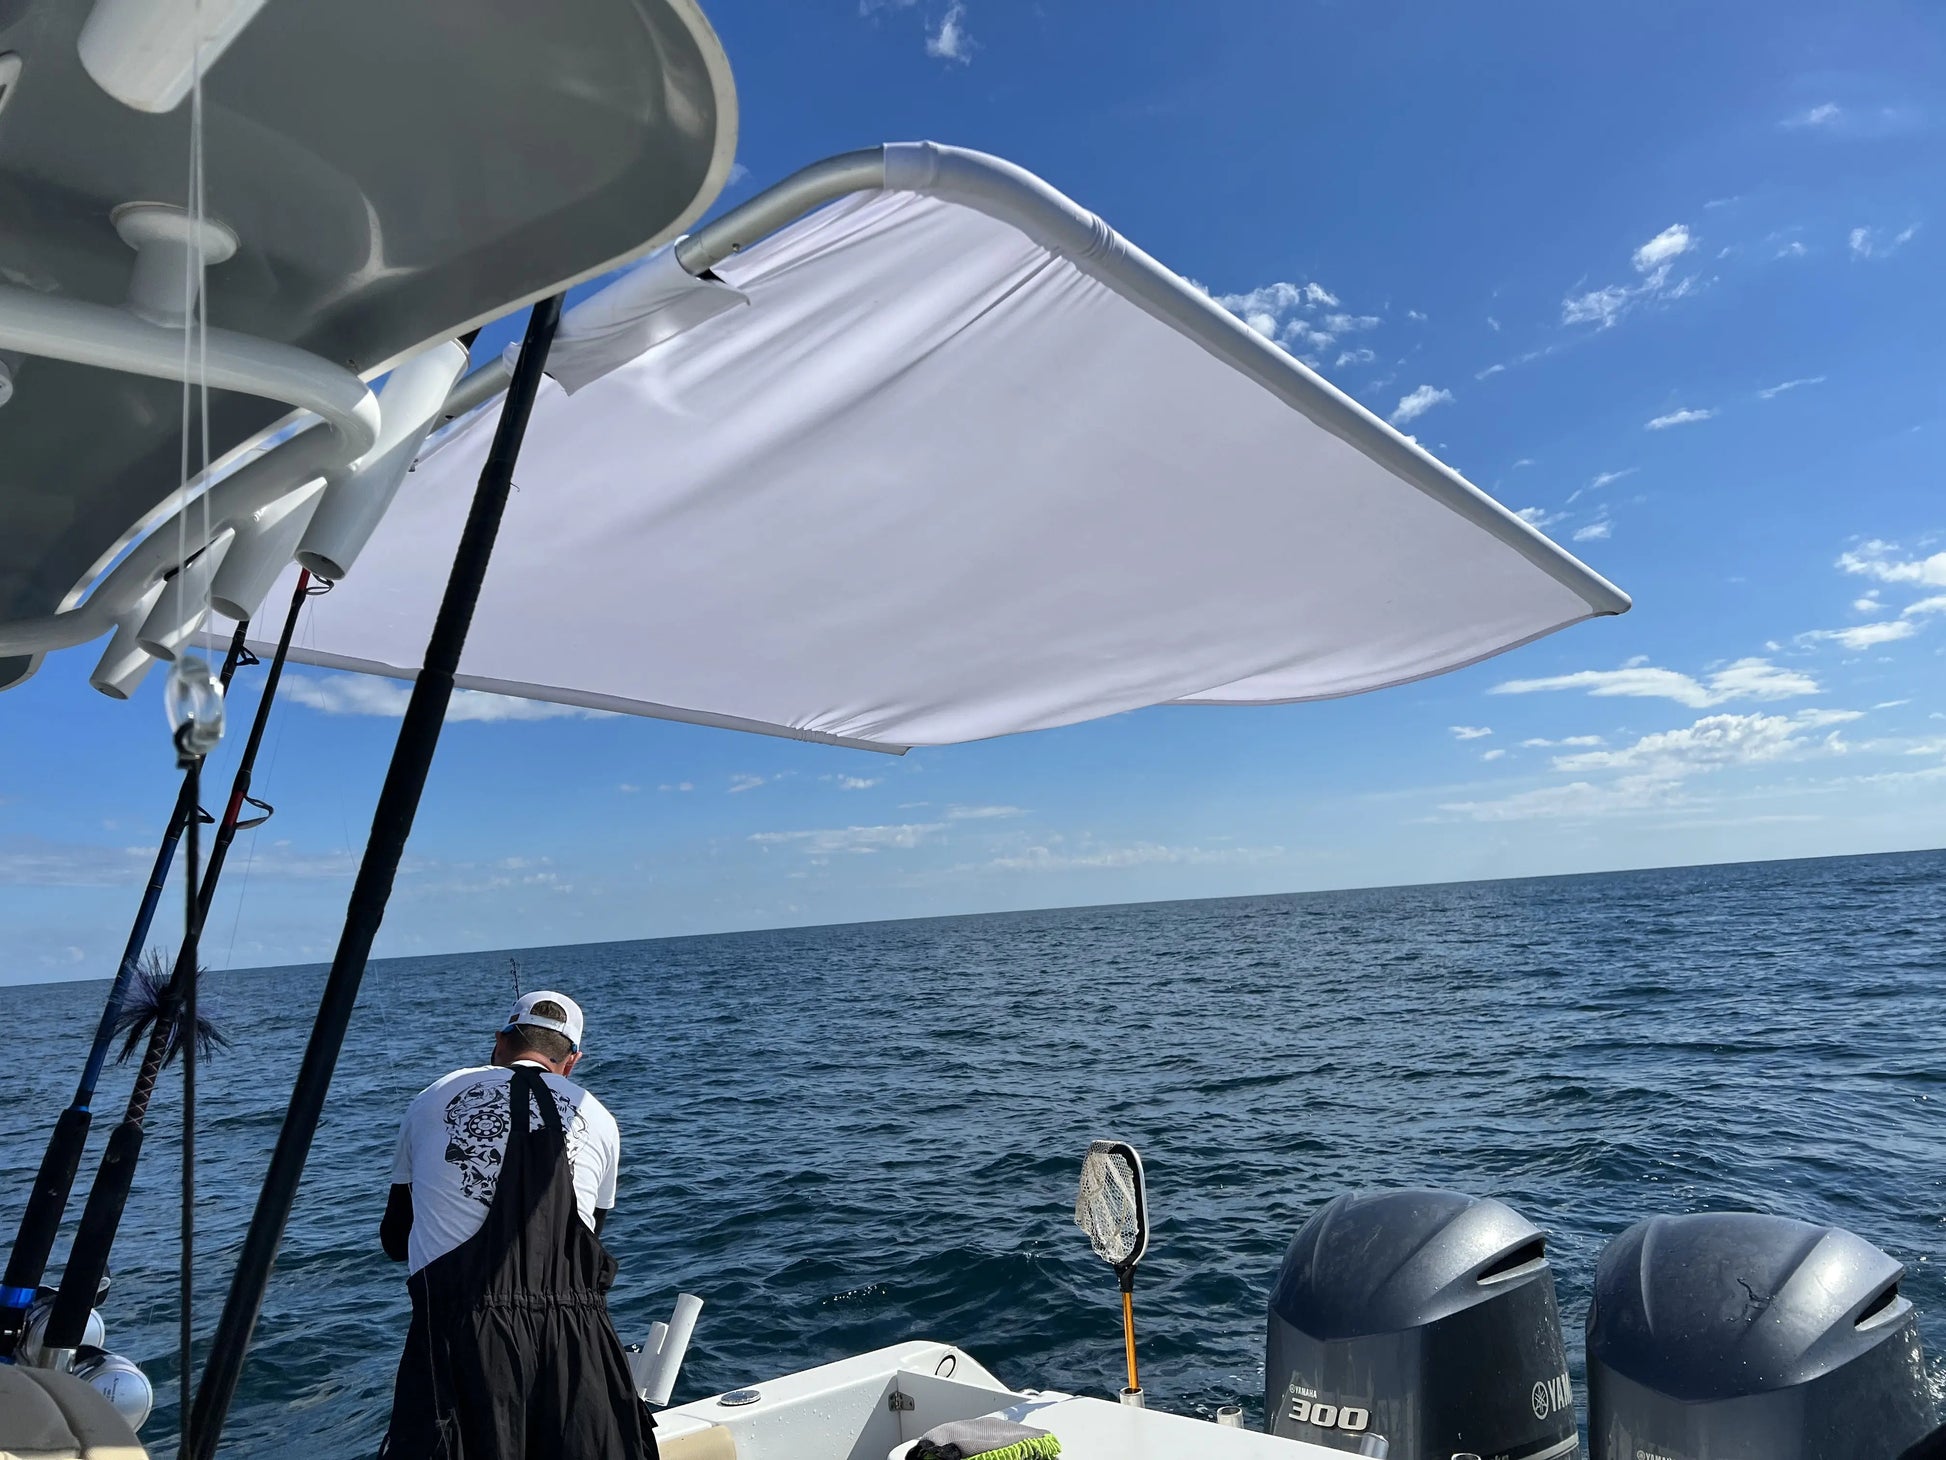 Dev Fishing Fabric Center Console Boat Shade Canopy Top Cover (White)